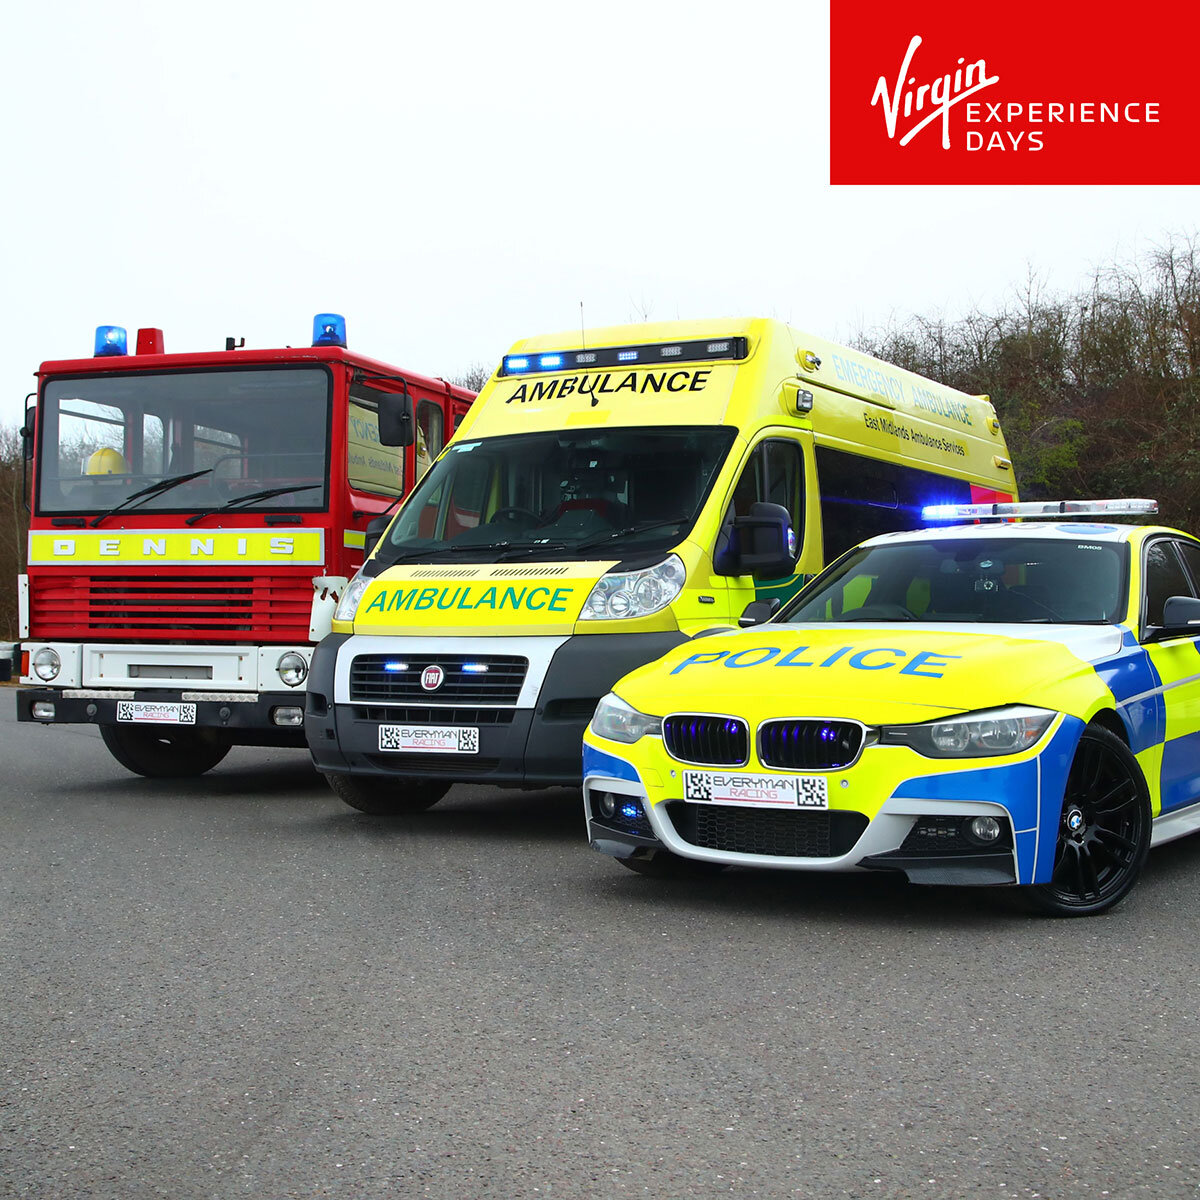 Virgin Experience Days Triple 999 Emergency Services Driving Experience